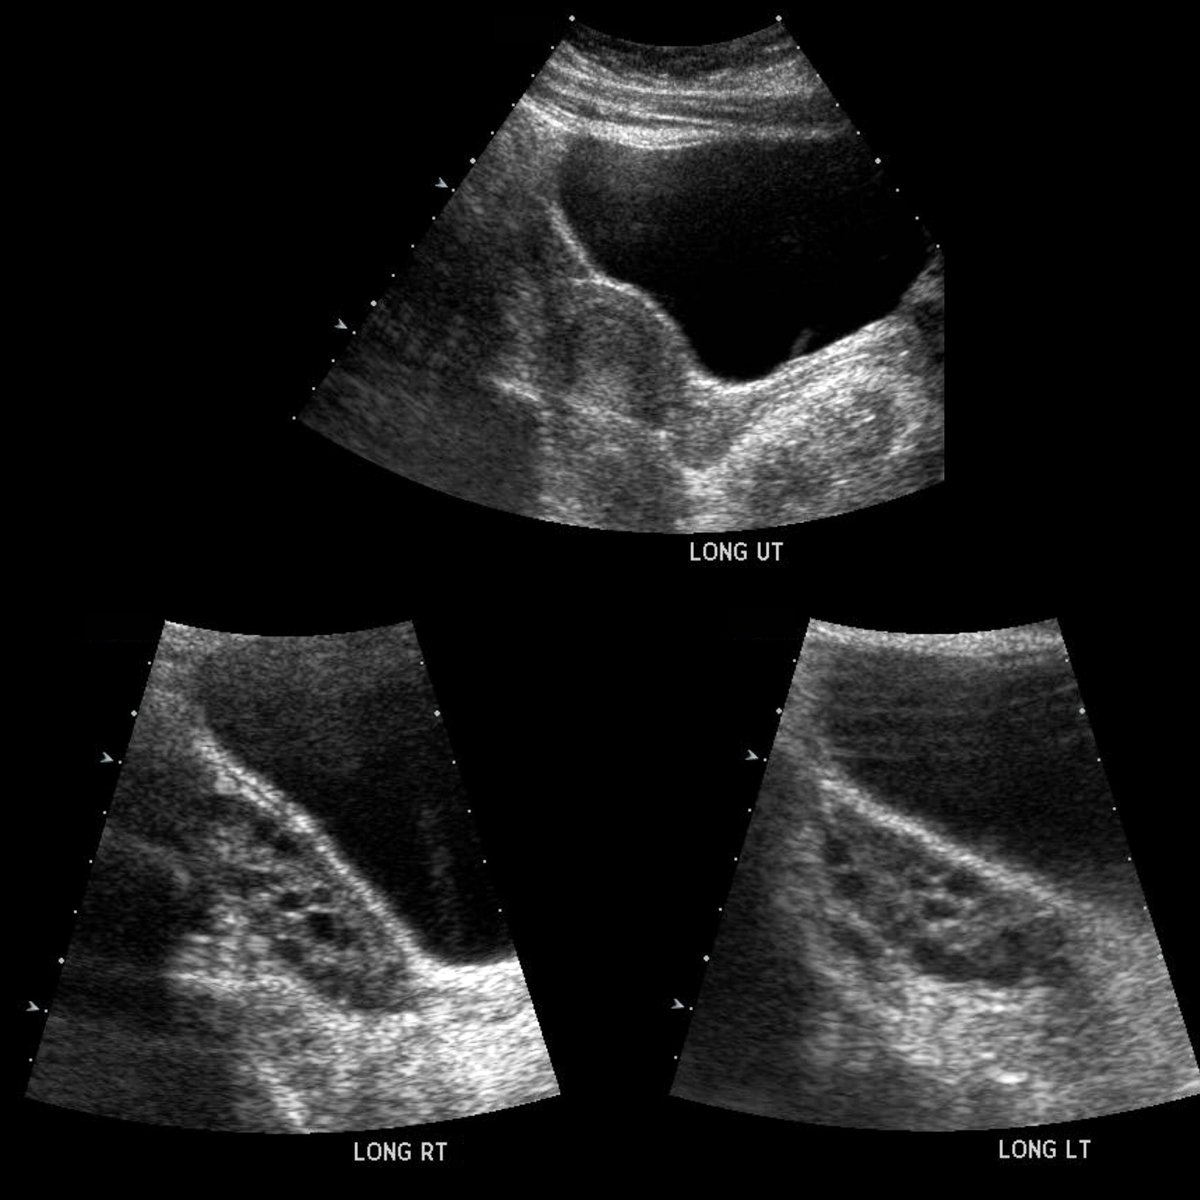 Teen with irregular menses

Sagittal US of pelvis shows normal uteru(above)+enlarged ovaries bilaterally(below), with each ovary containing a larger number of follicles (>20) than normal

#FOAMed #MedEd #FOAMPed #FOAMRad #PedsRad #RadEd #RadRes #radiology #PedUro #FOAMus #USRad